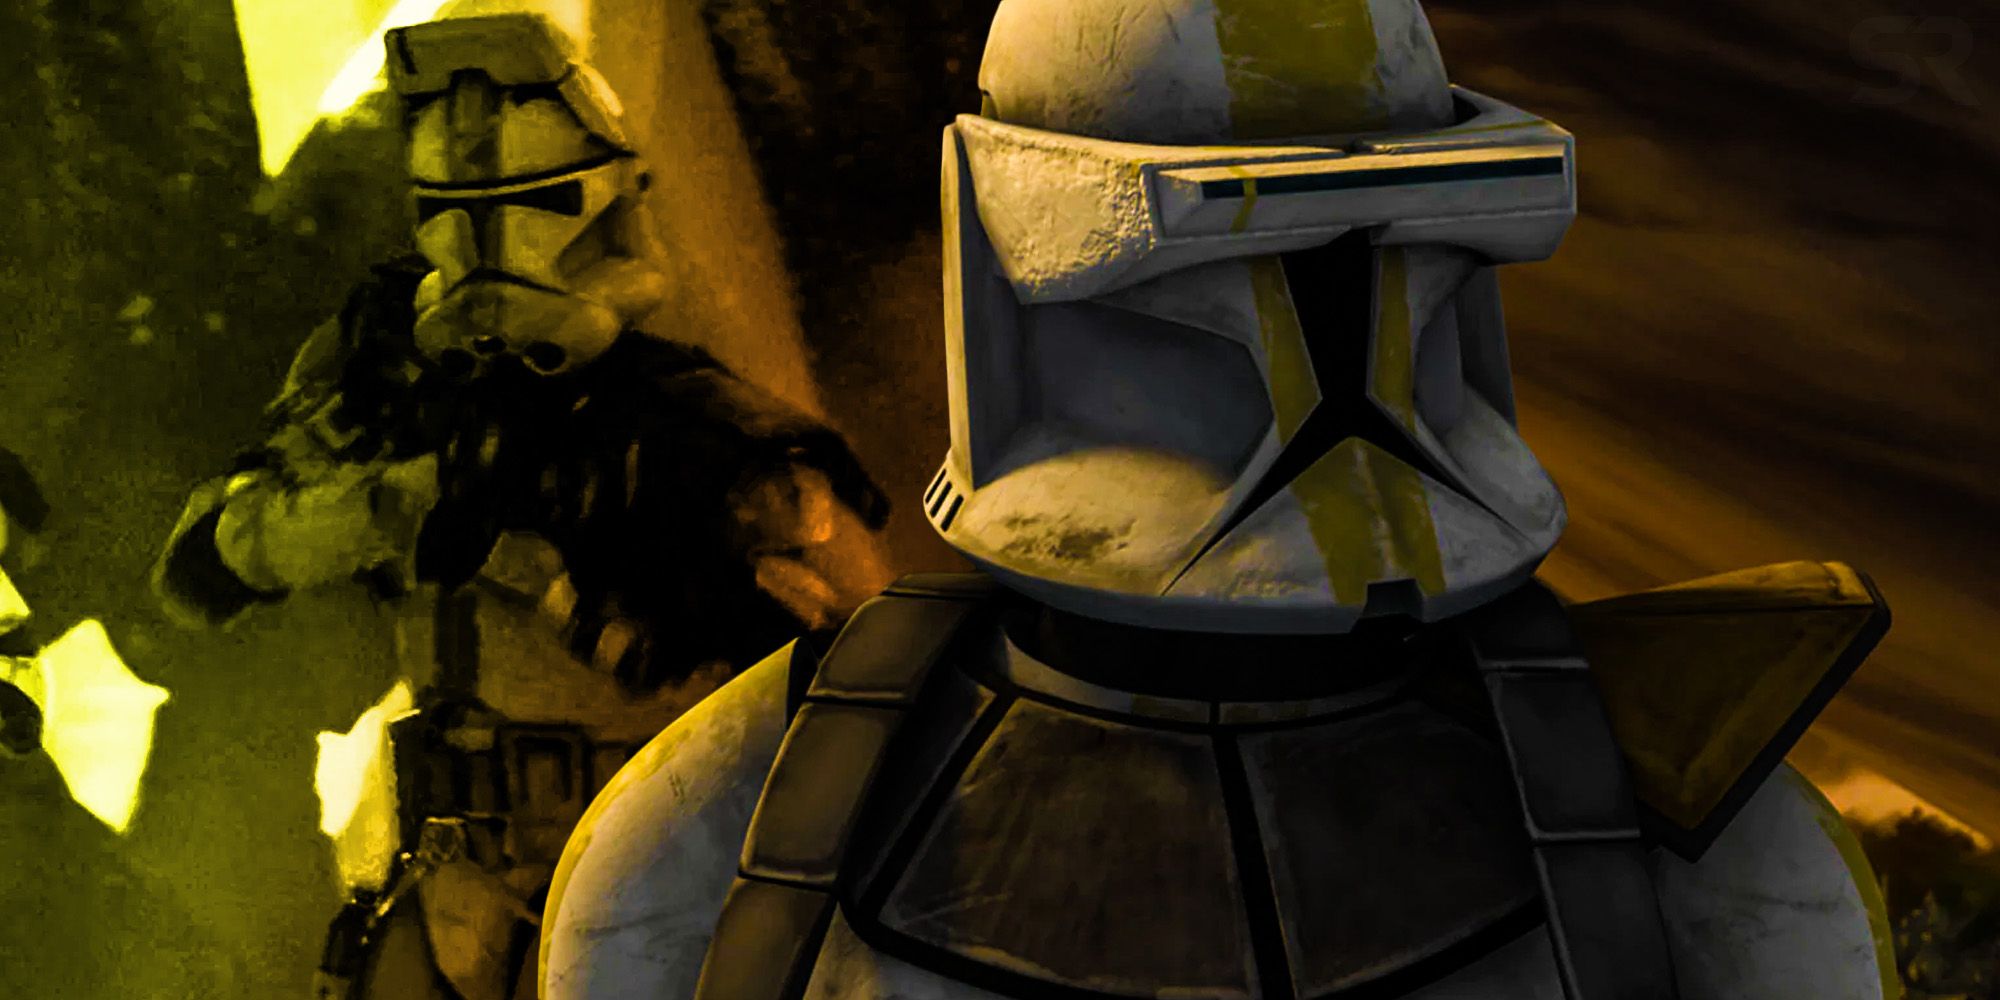 Clone Wars Troopers who also appeared in prequel movies Commander bly